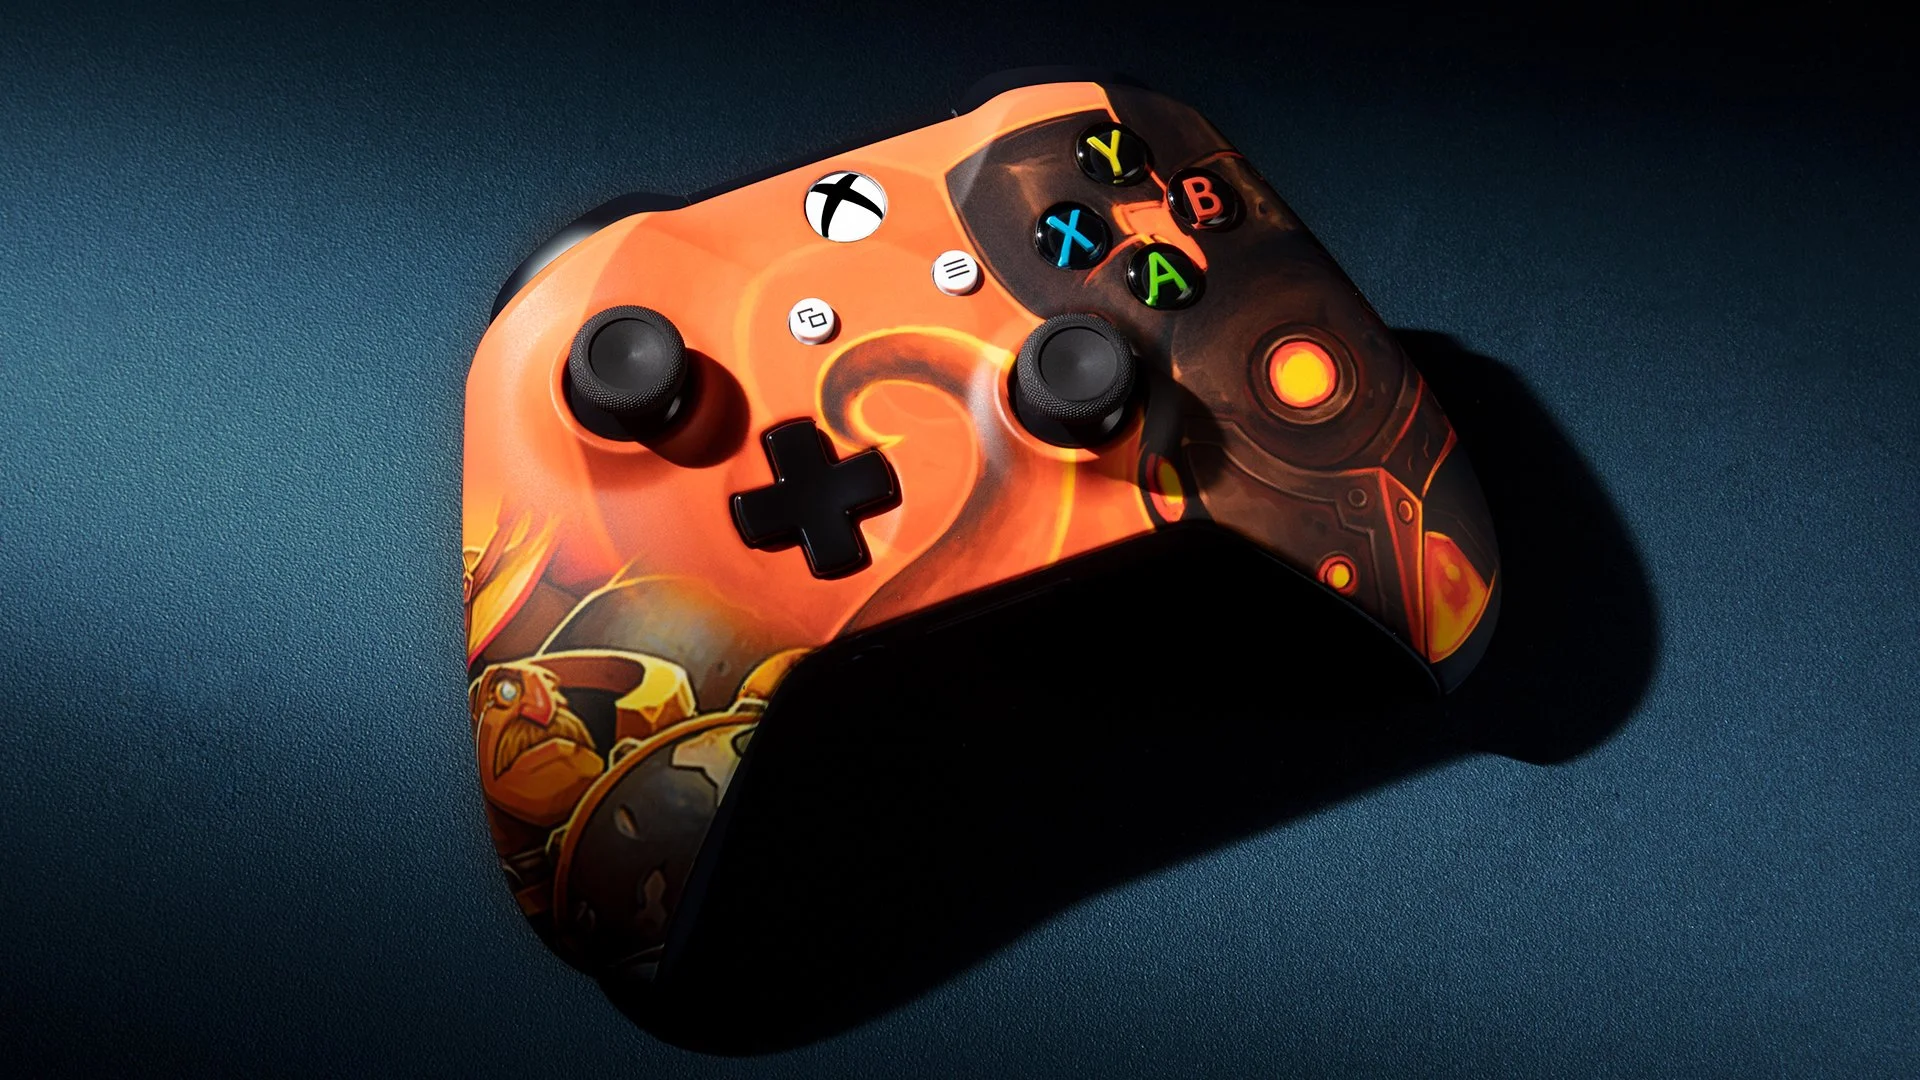  Microsoft Xbox One S Torchlight 2 Controller